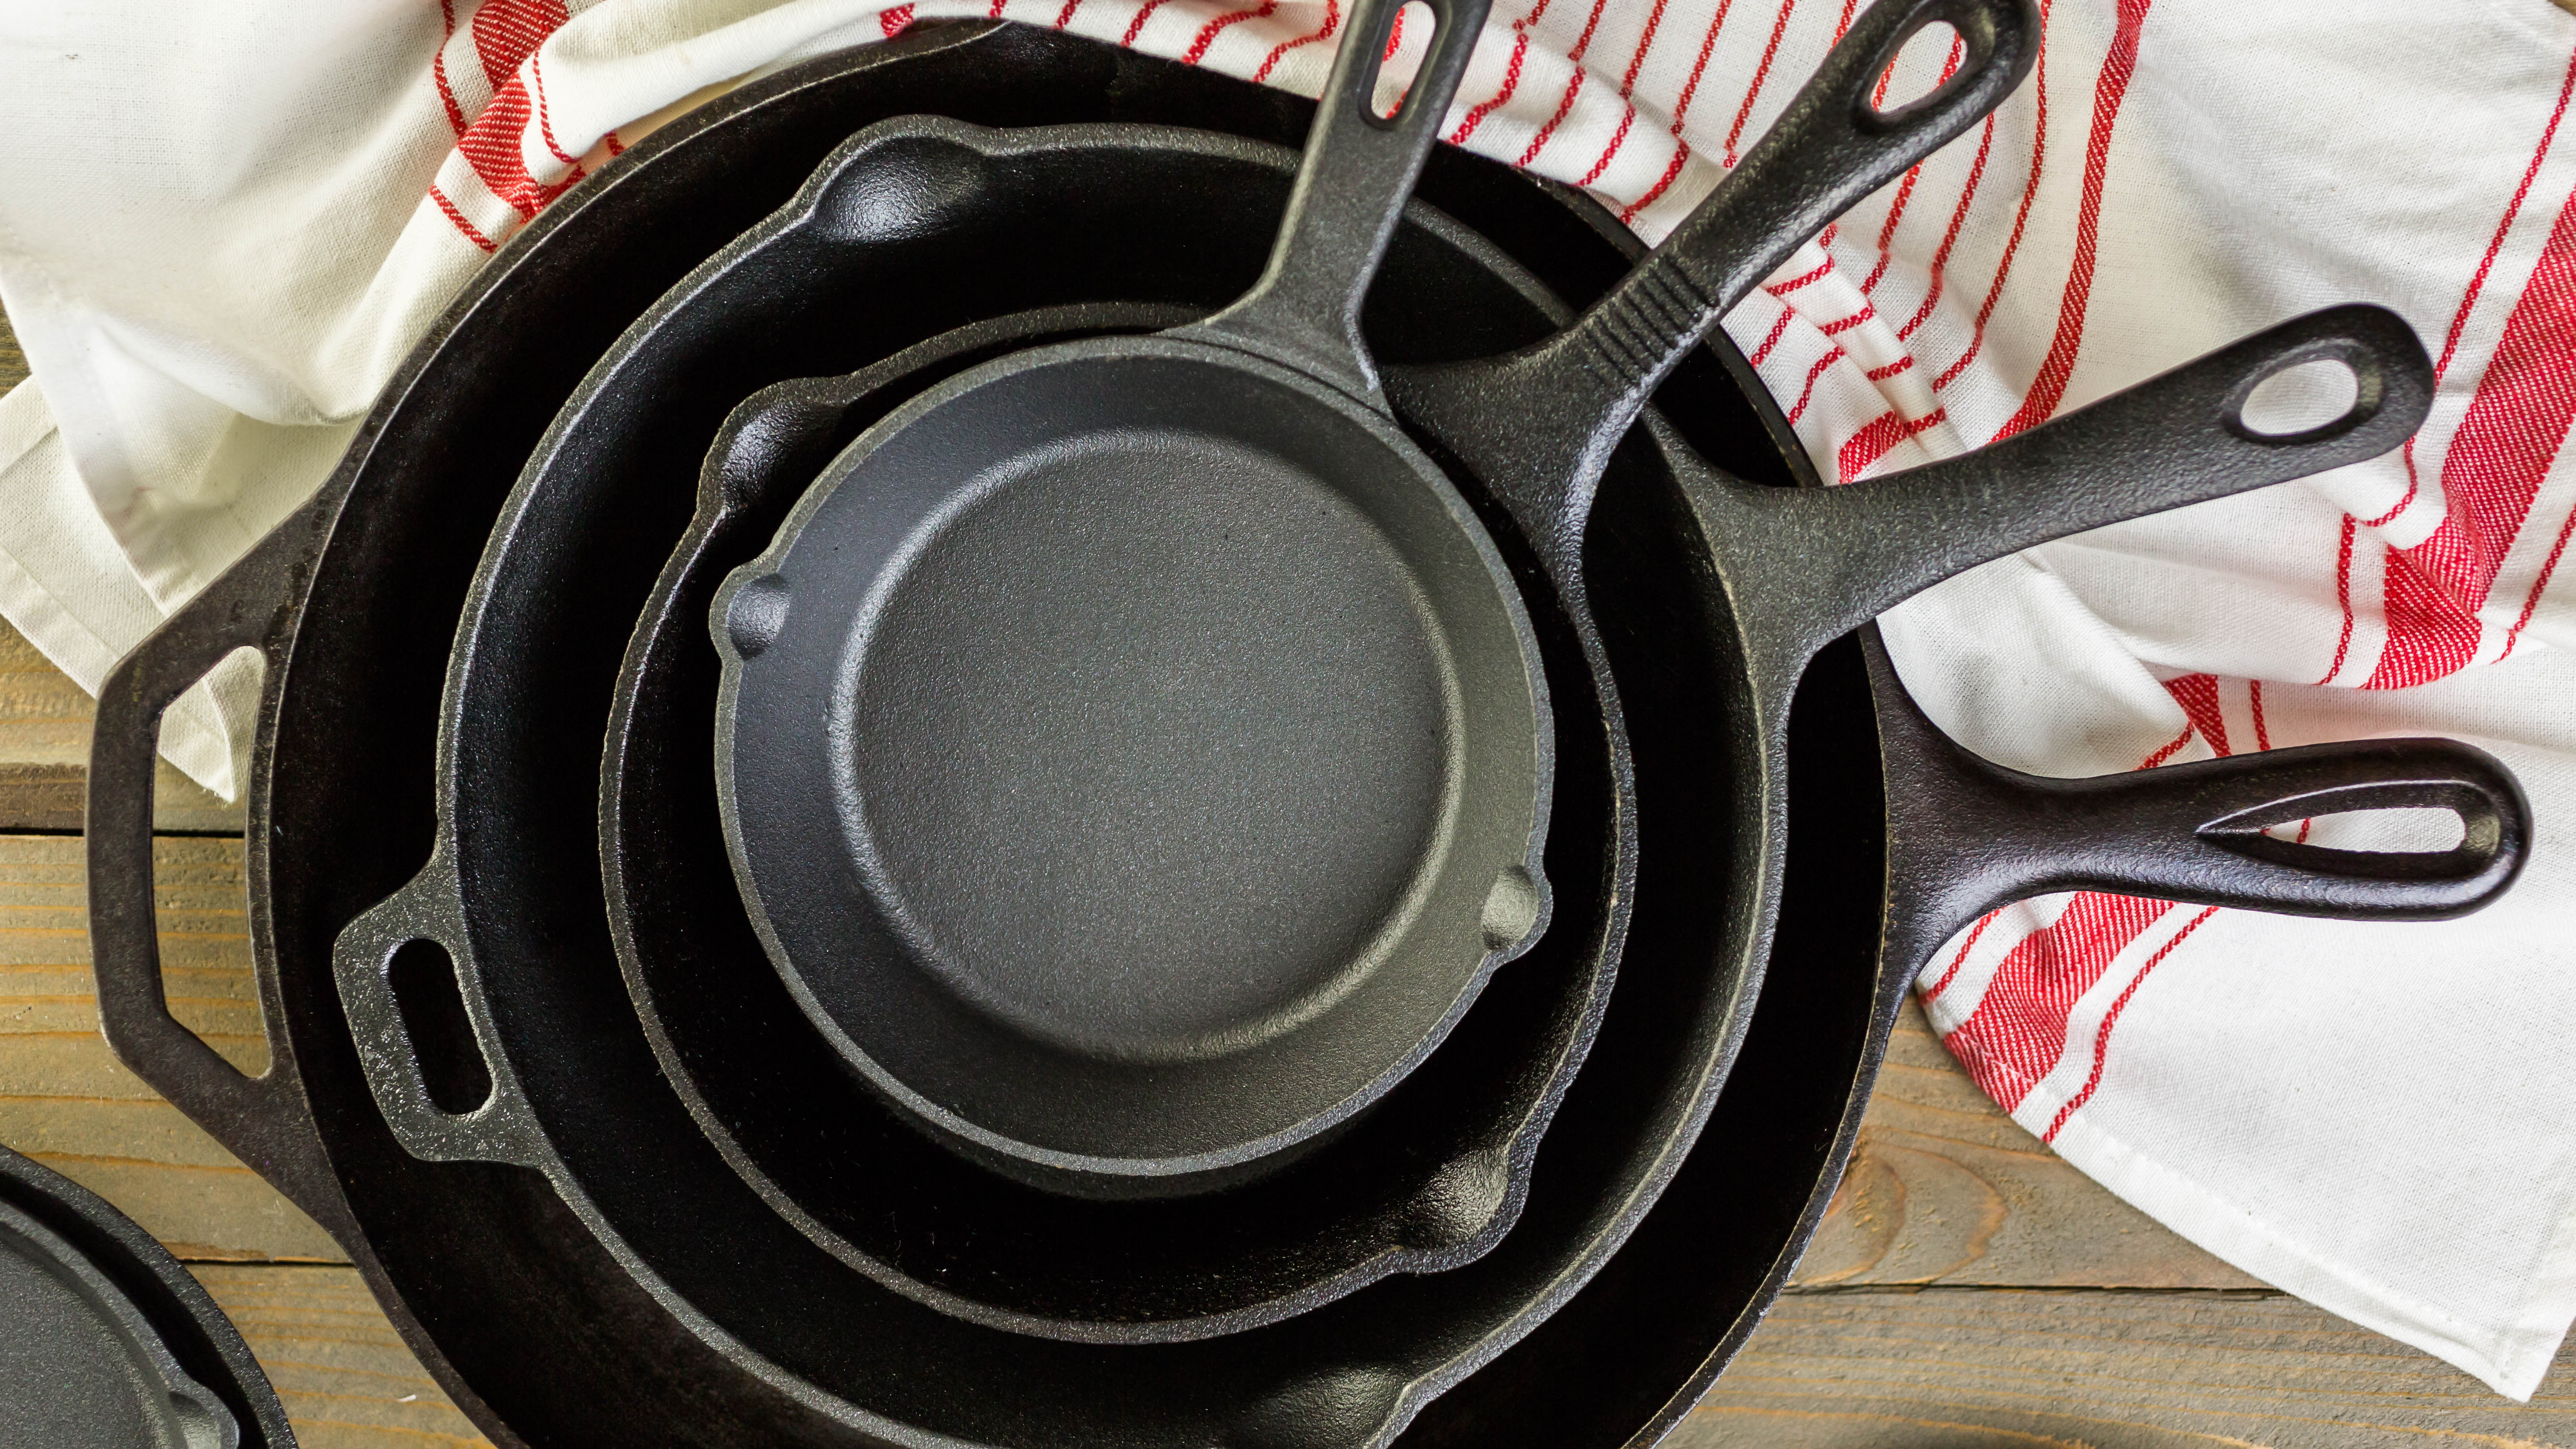 Knowing Skillet Sizes Actually Does Matter: Here's How to Measure